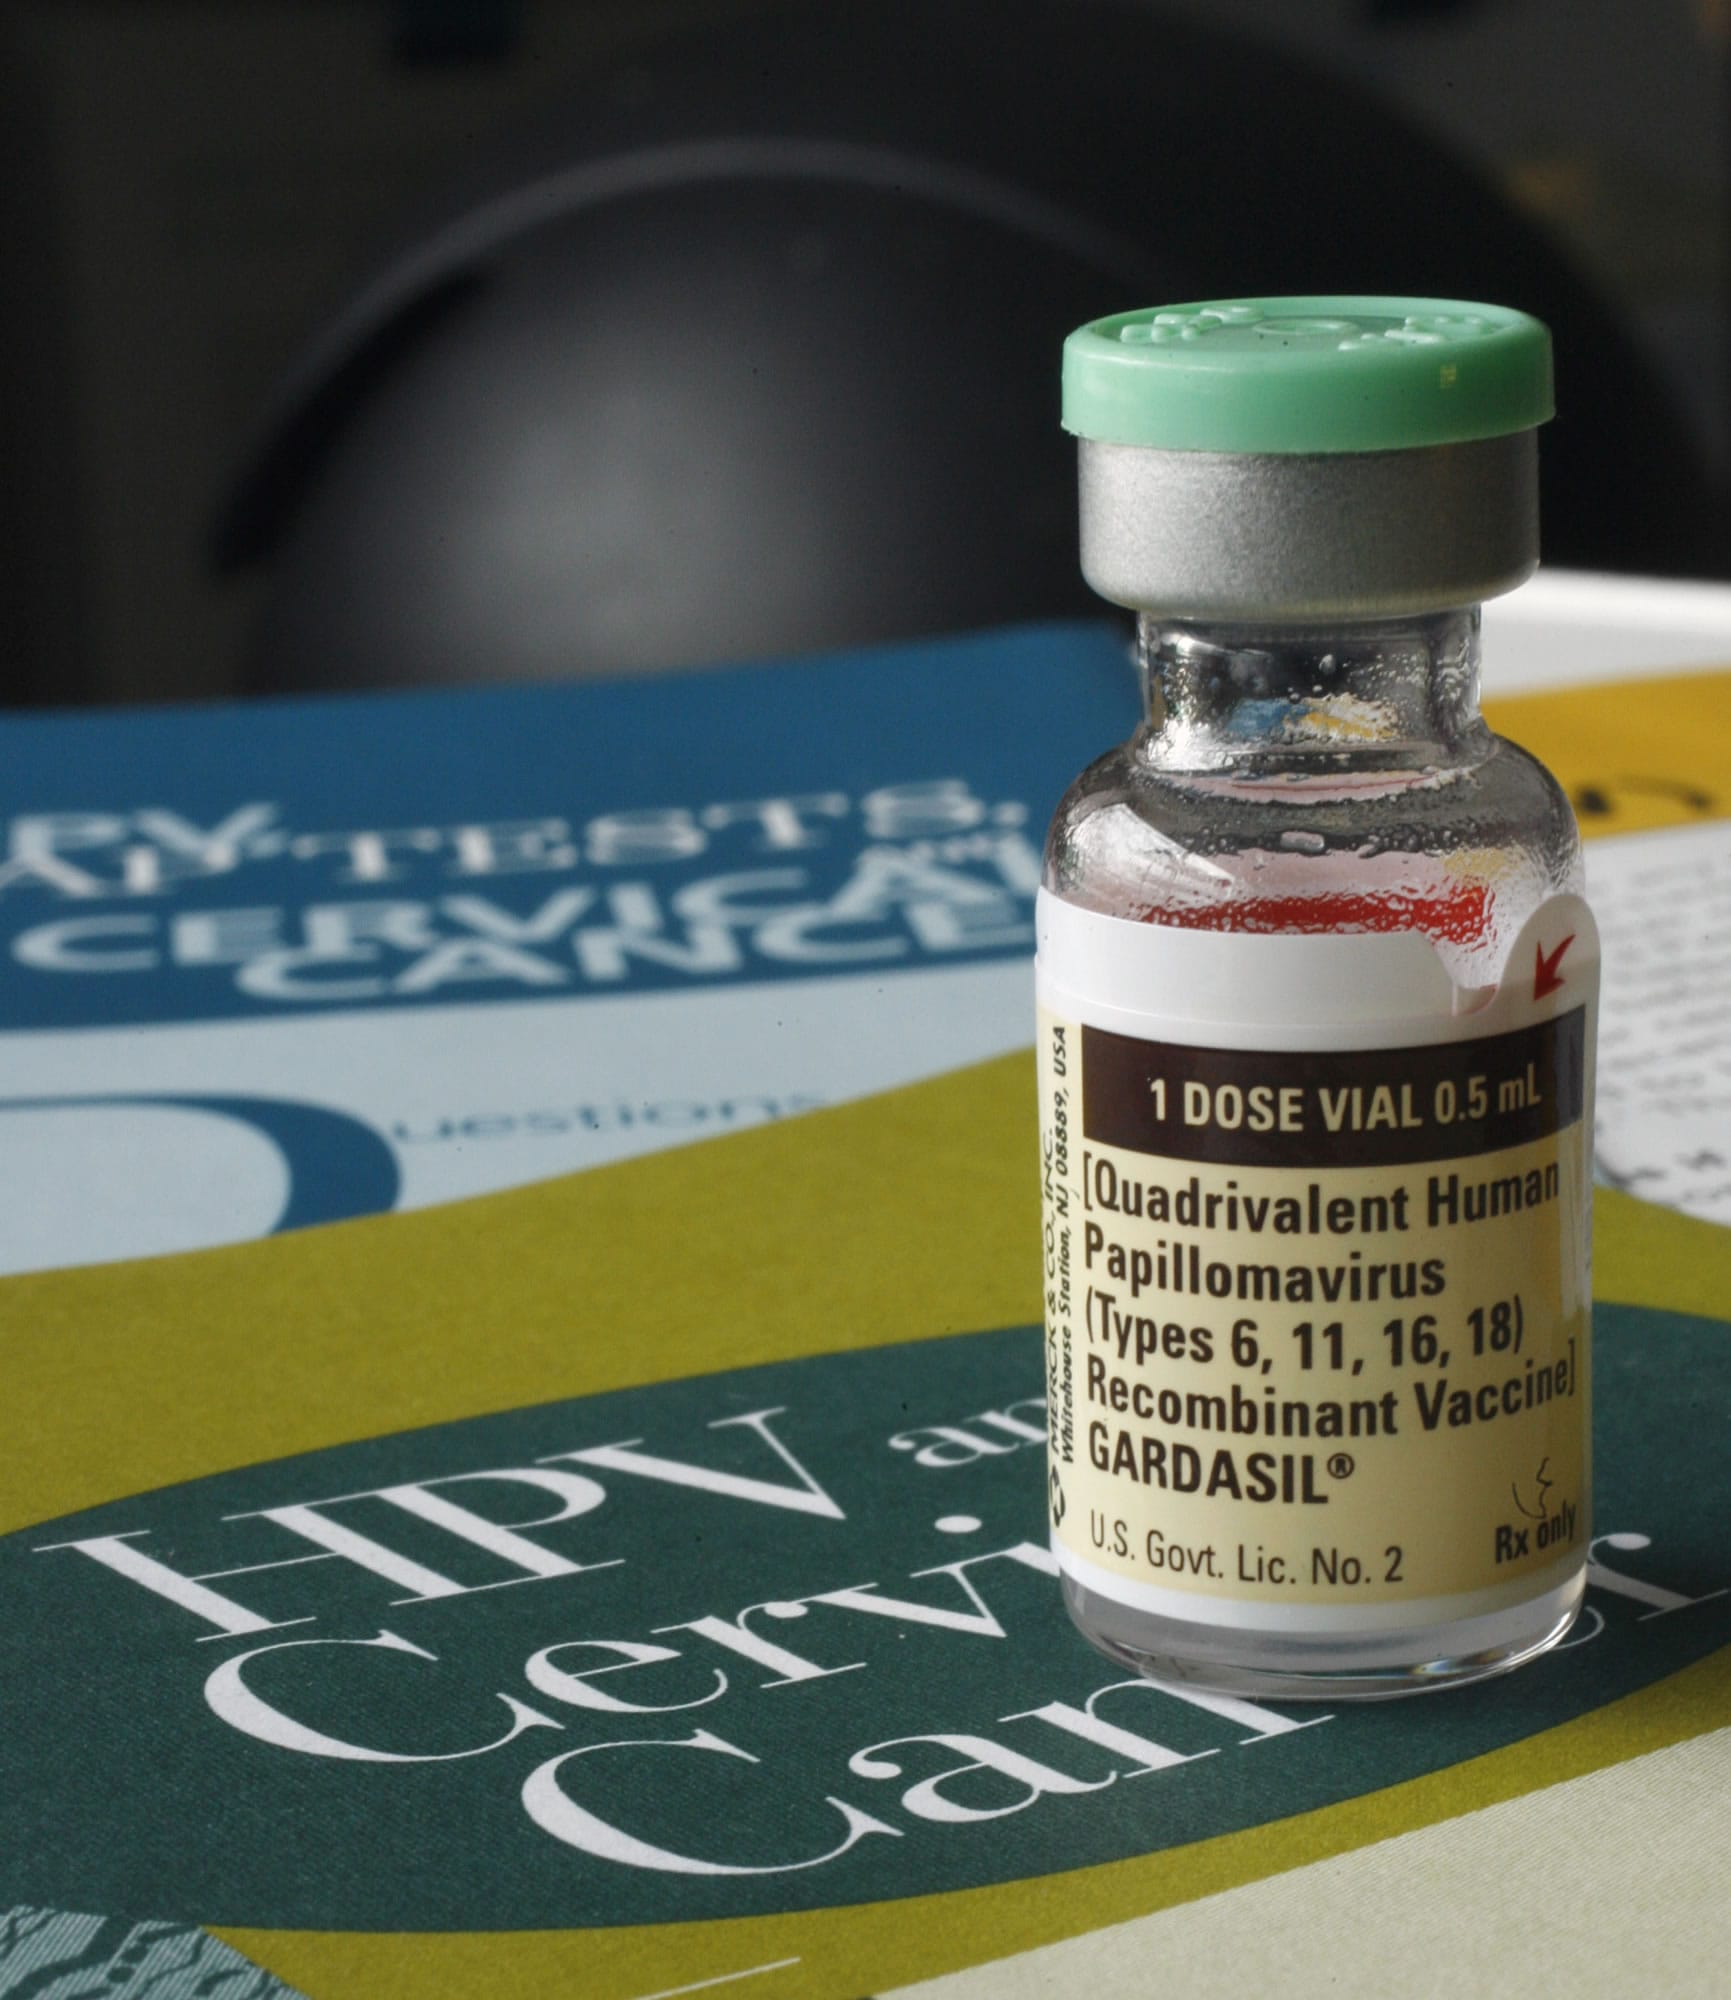 Associated Press files
Gardasil protects against four strains of human papilloma virus, which causes genital warts and cervical cancer. It generated more than $1.6 billion in 2012 sales for Merck.